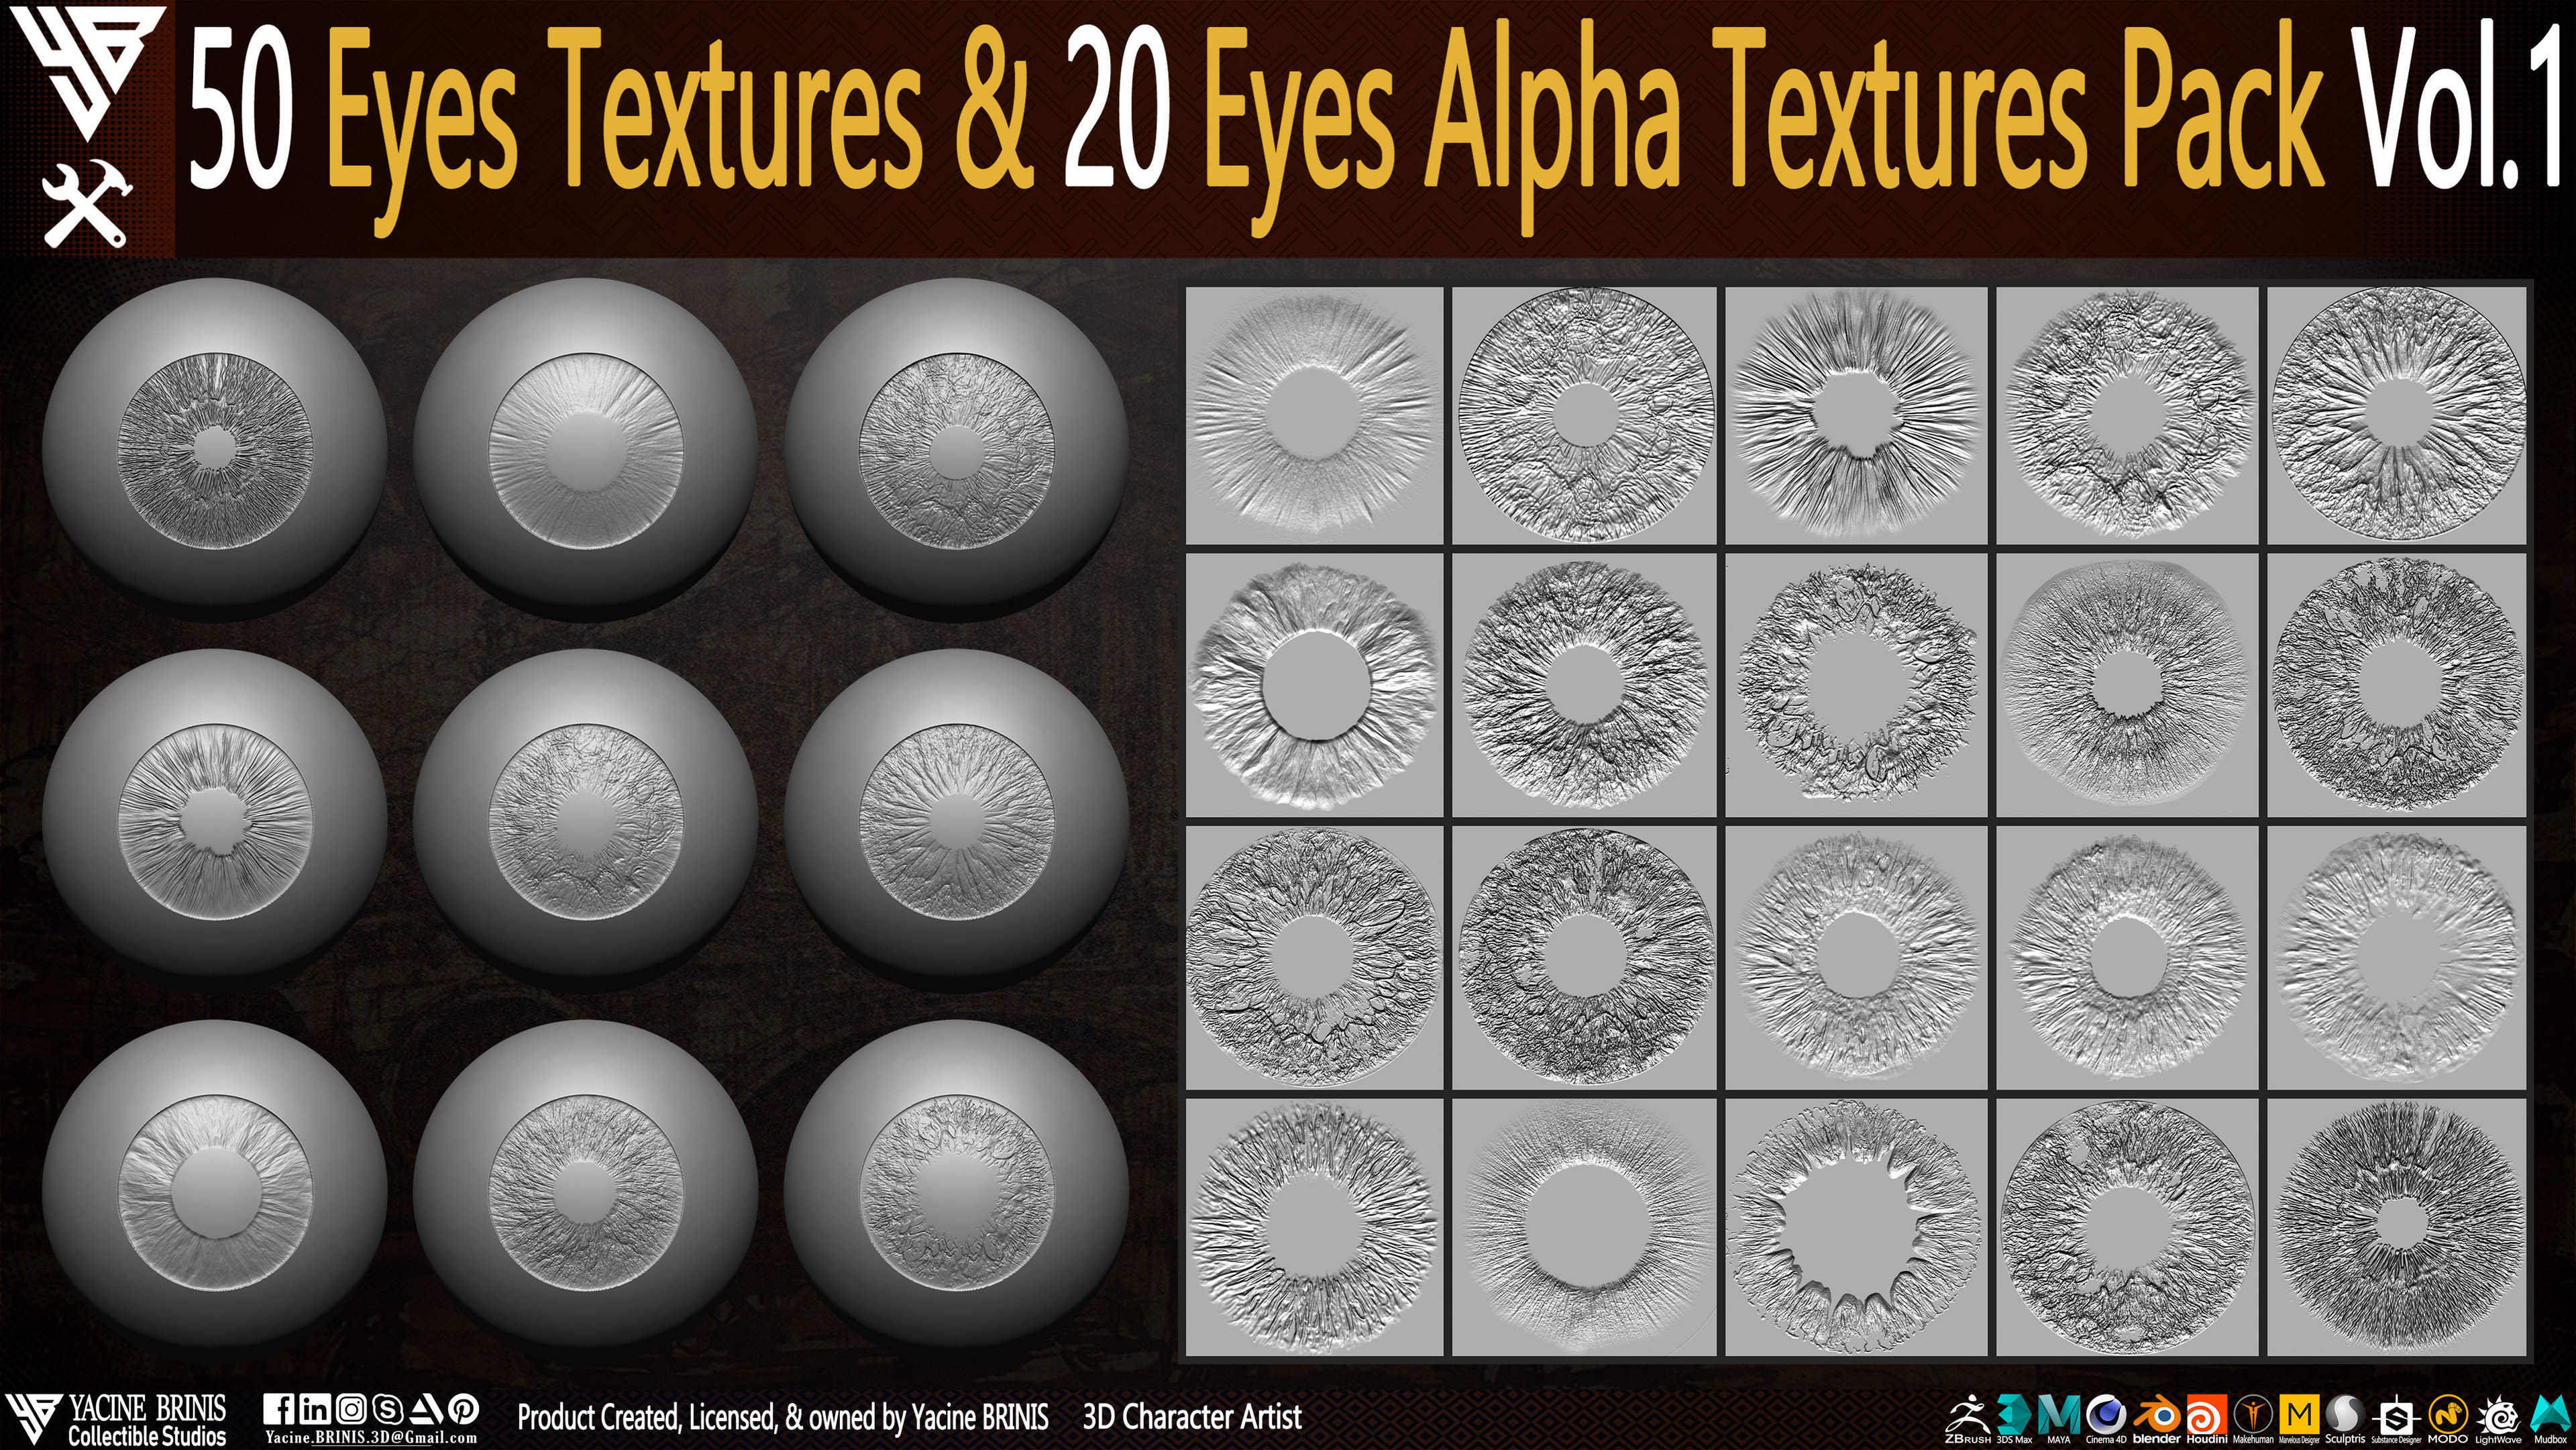 50 Eyes Textures and 20 Eyes Alpha Textures Pack Vol 01 sculpted by Yacine BRINIS Set 07